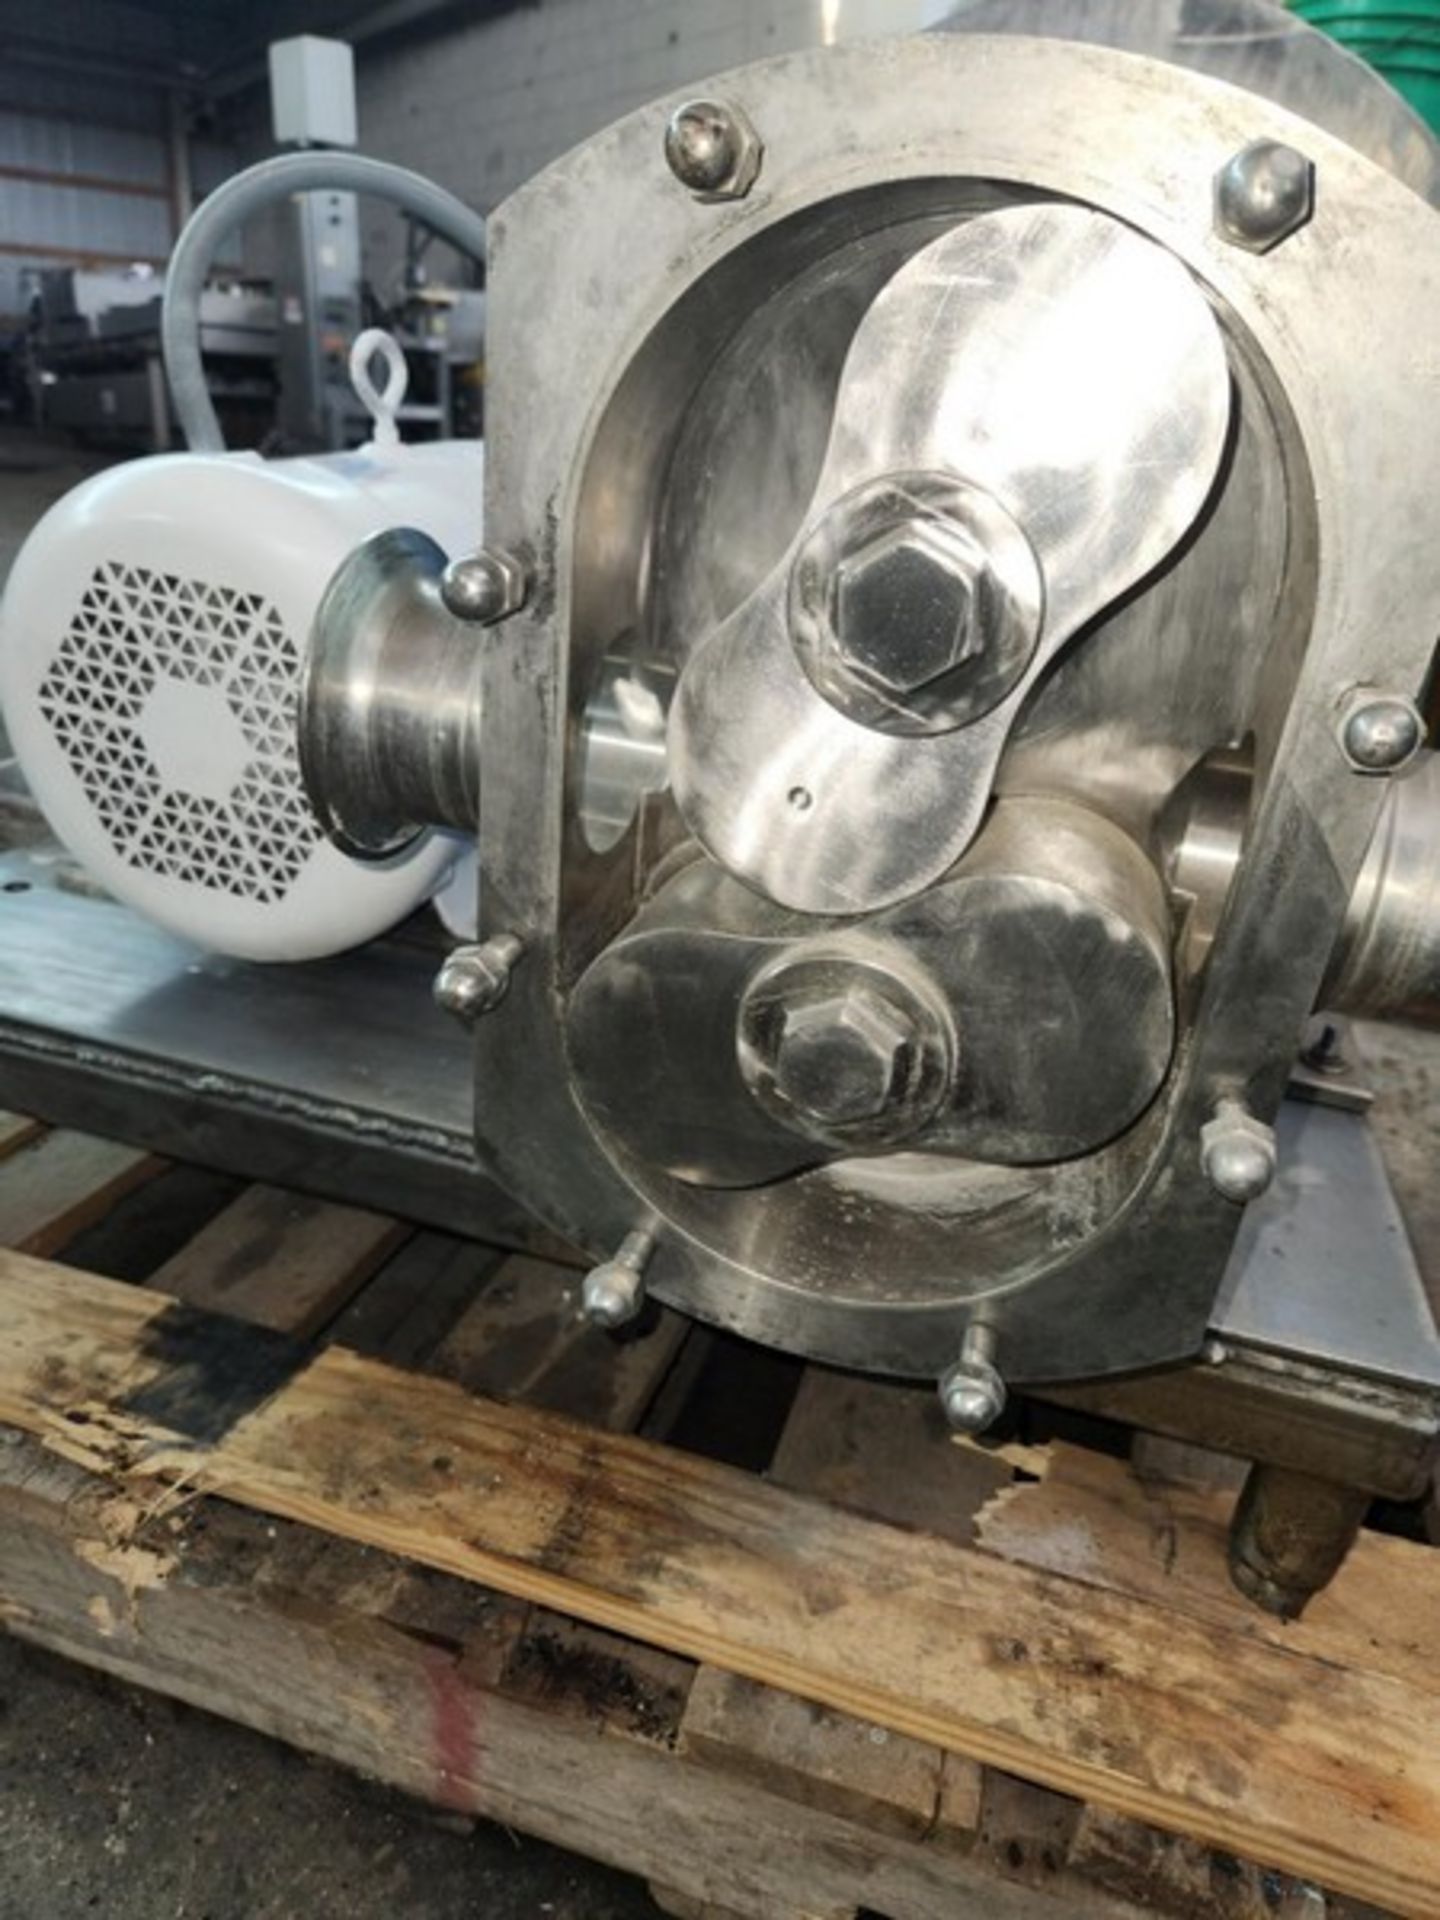 G H (Alfa Laval) 7.5 hp 4" S/S Sanitary Positive Displacement Pump, Model 822, S/N 95-8-50174 with - Image 8 of 15